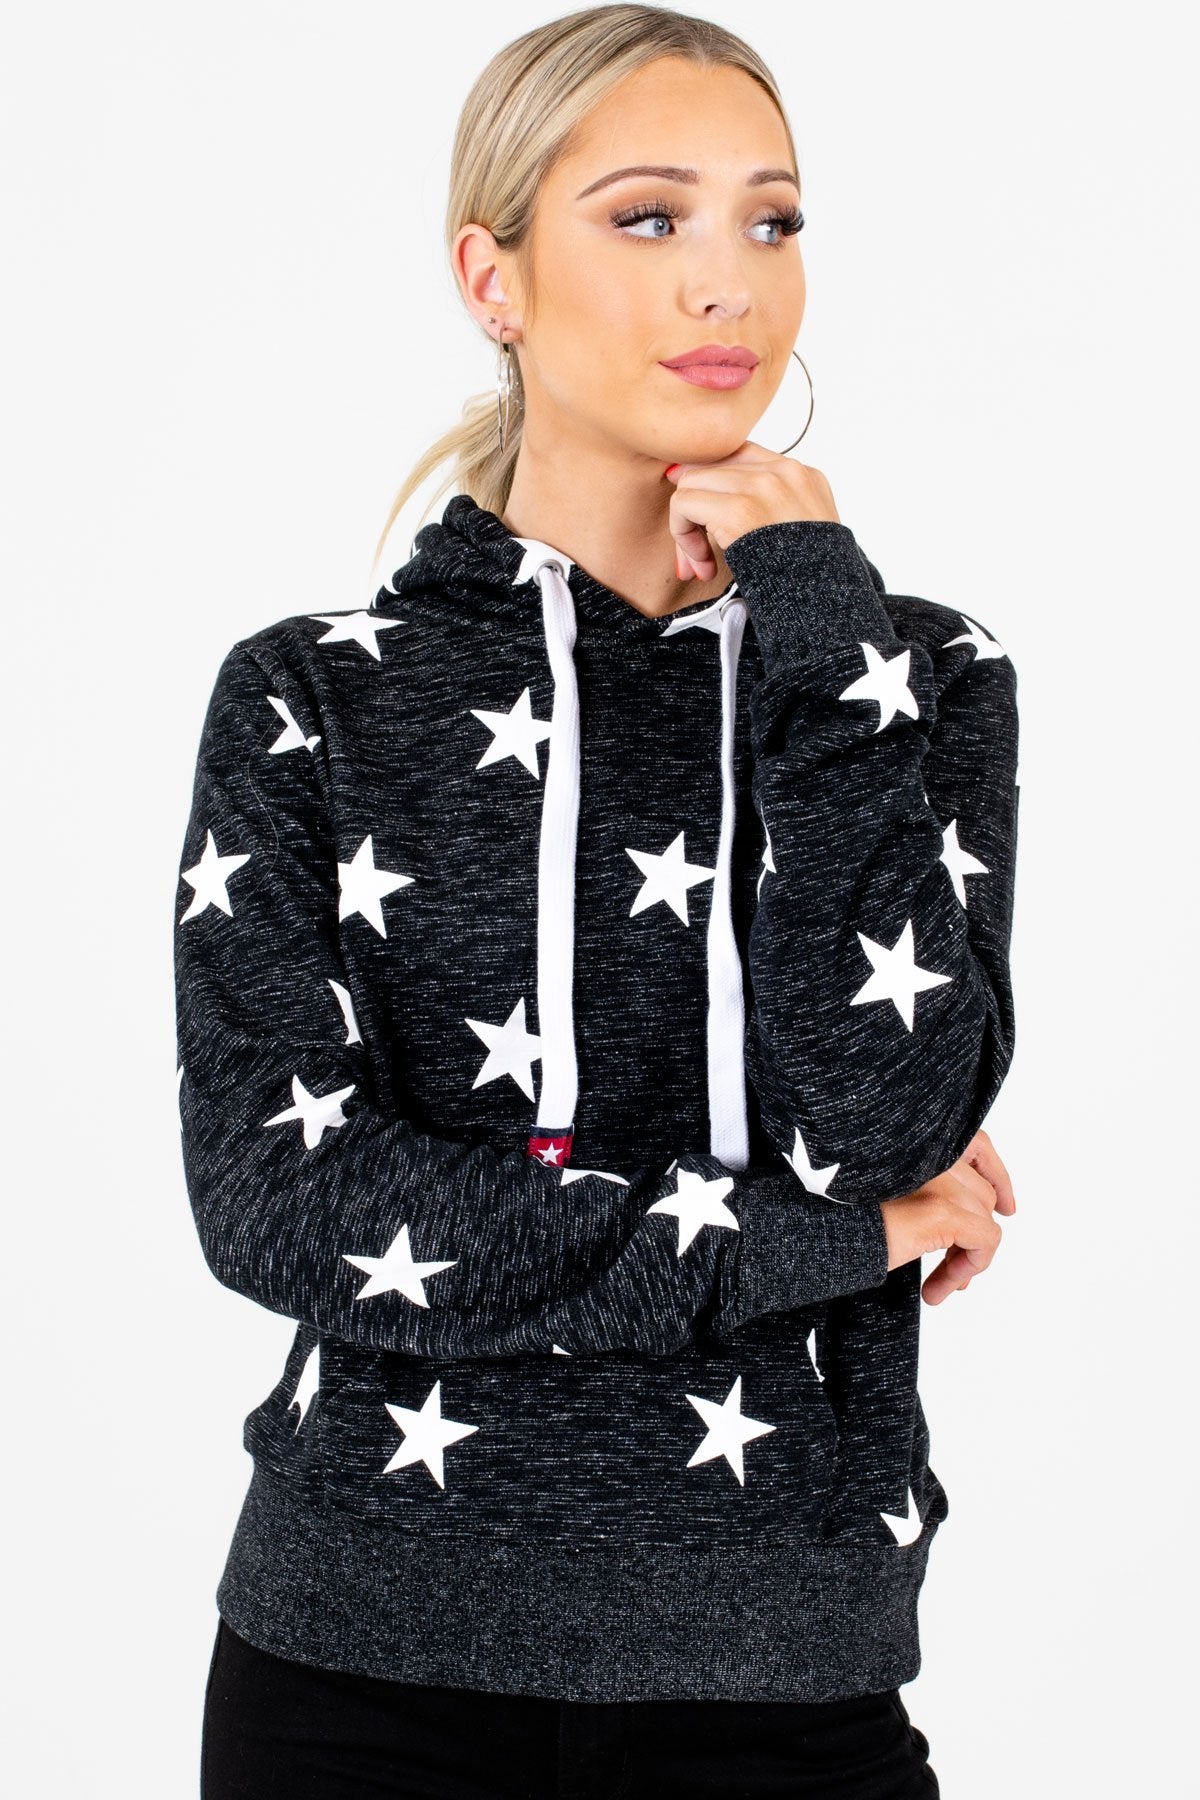 Women’s Heather Black Casual Everyday Boutique Hoodies